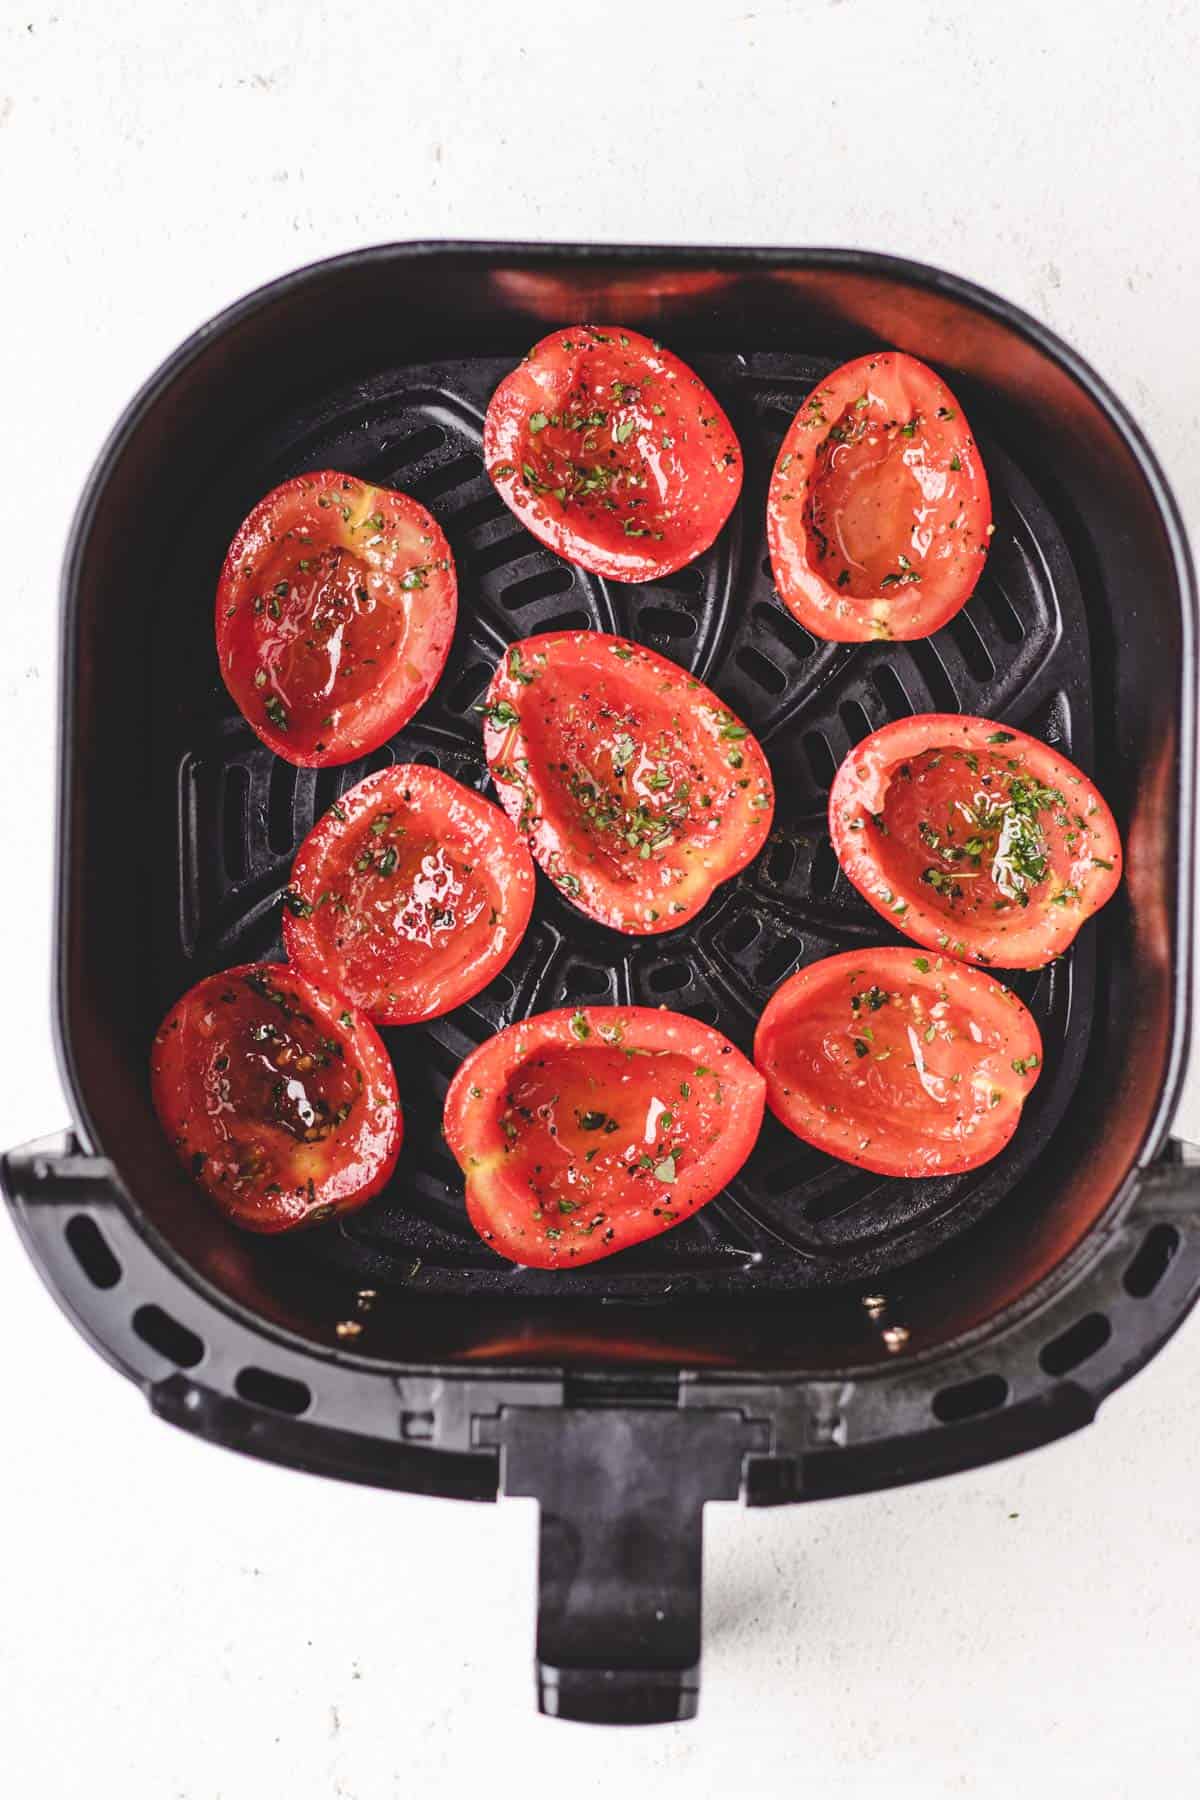 Raw tomato halves arranged in an air fryer basket, ready for slow roasting.